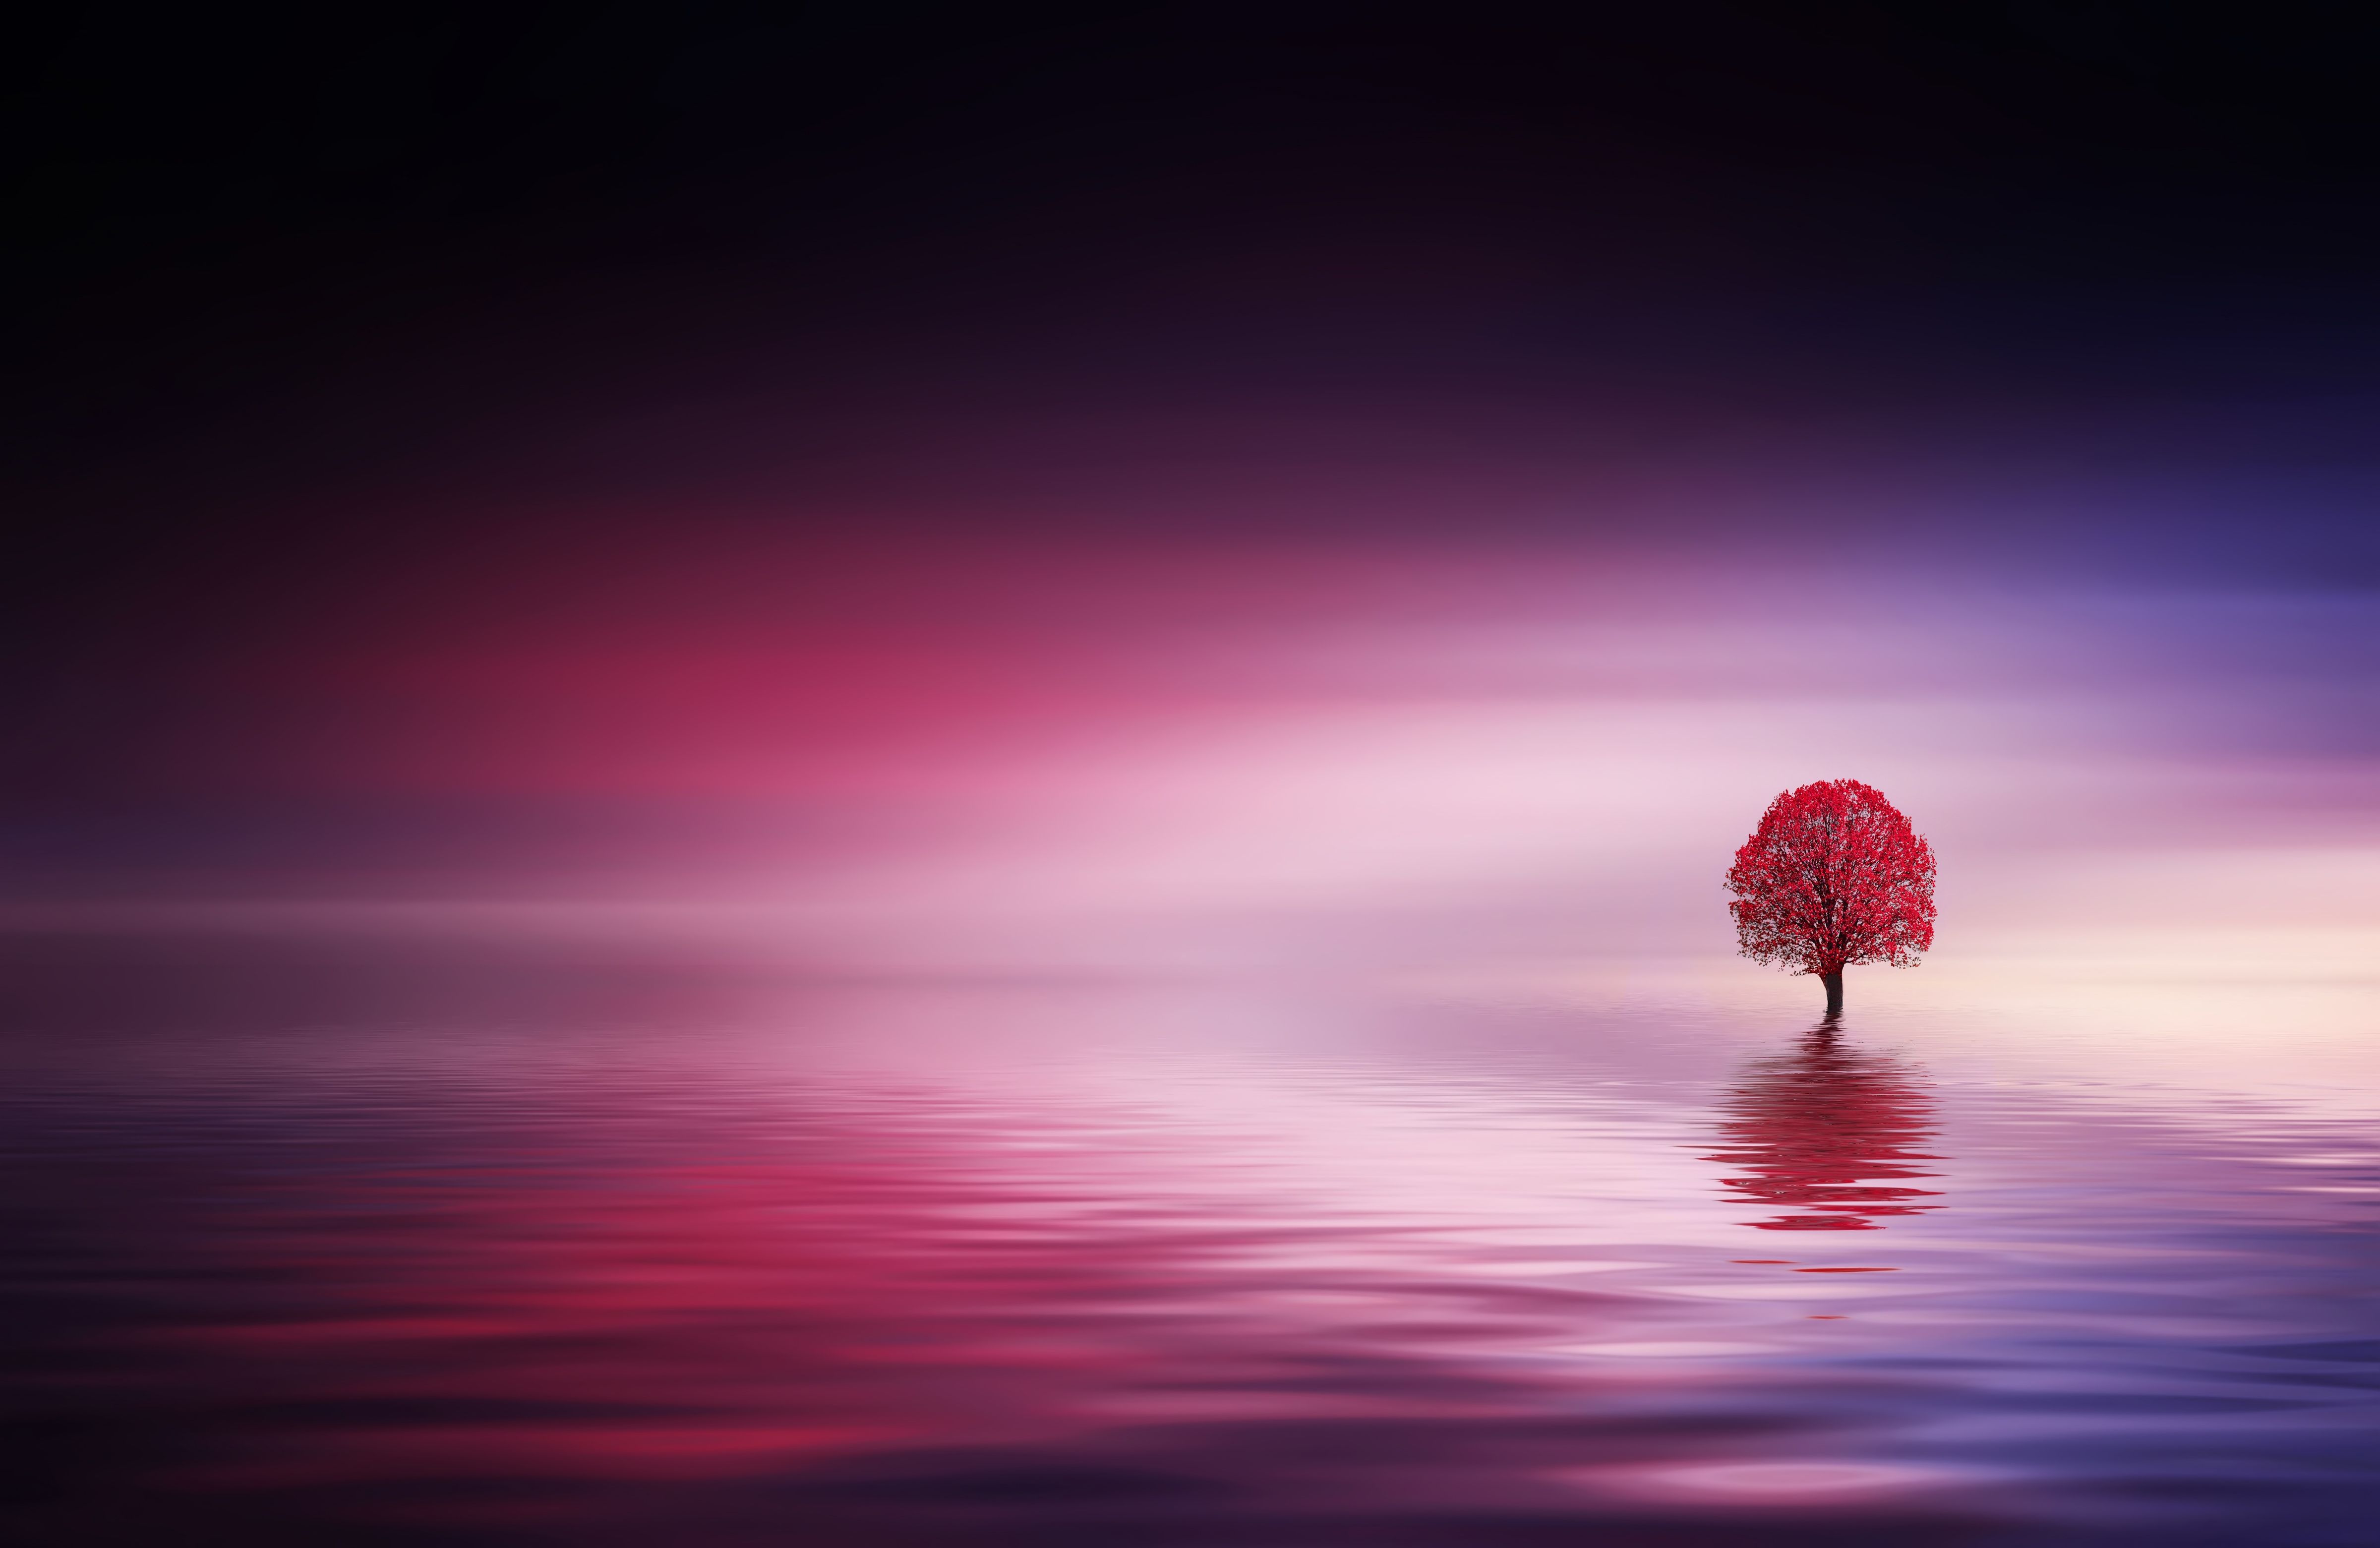 9 Magical tree with red leaves in the lake.jpg